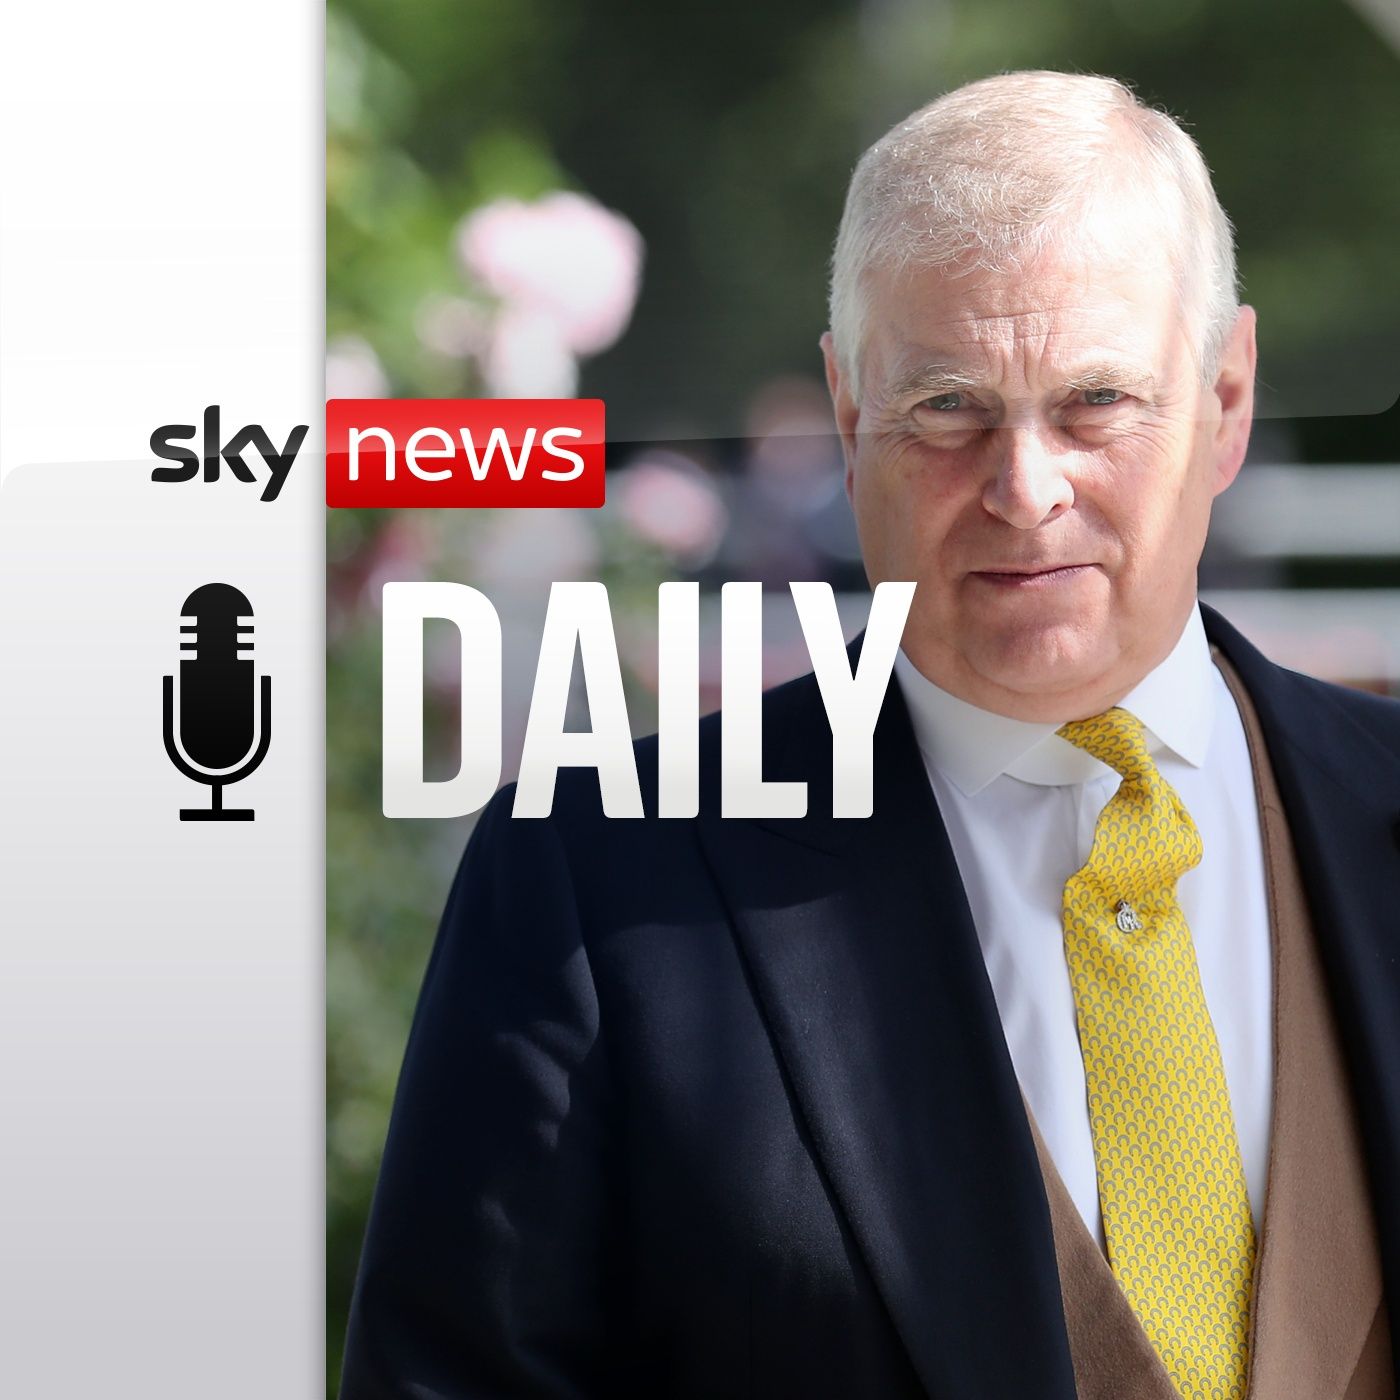 Prince Andrew on trial: What happens next?